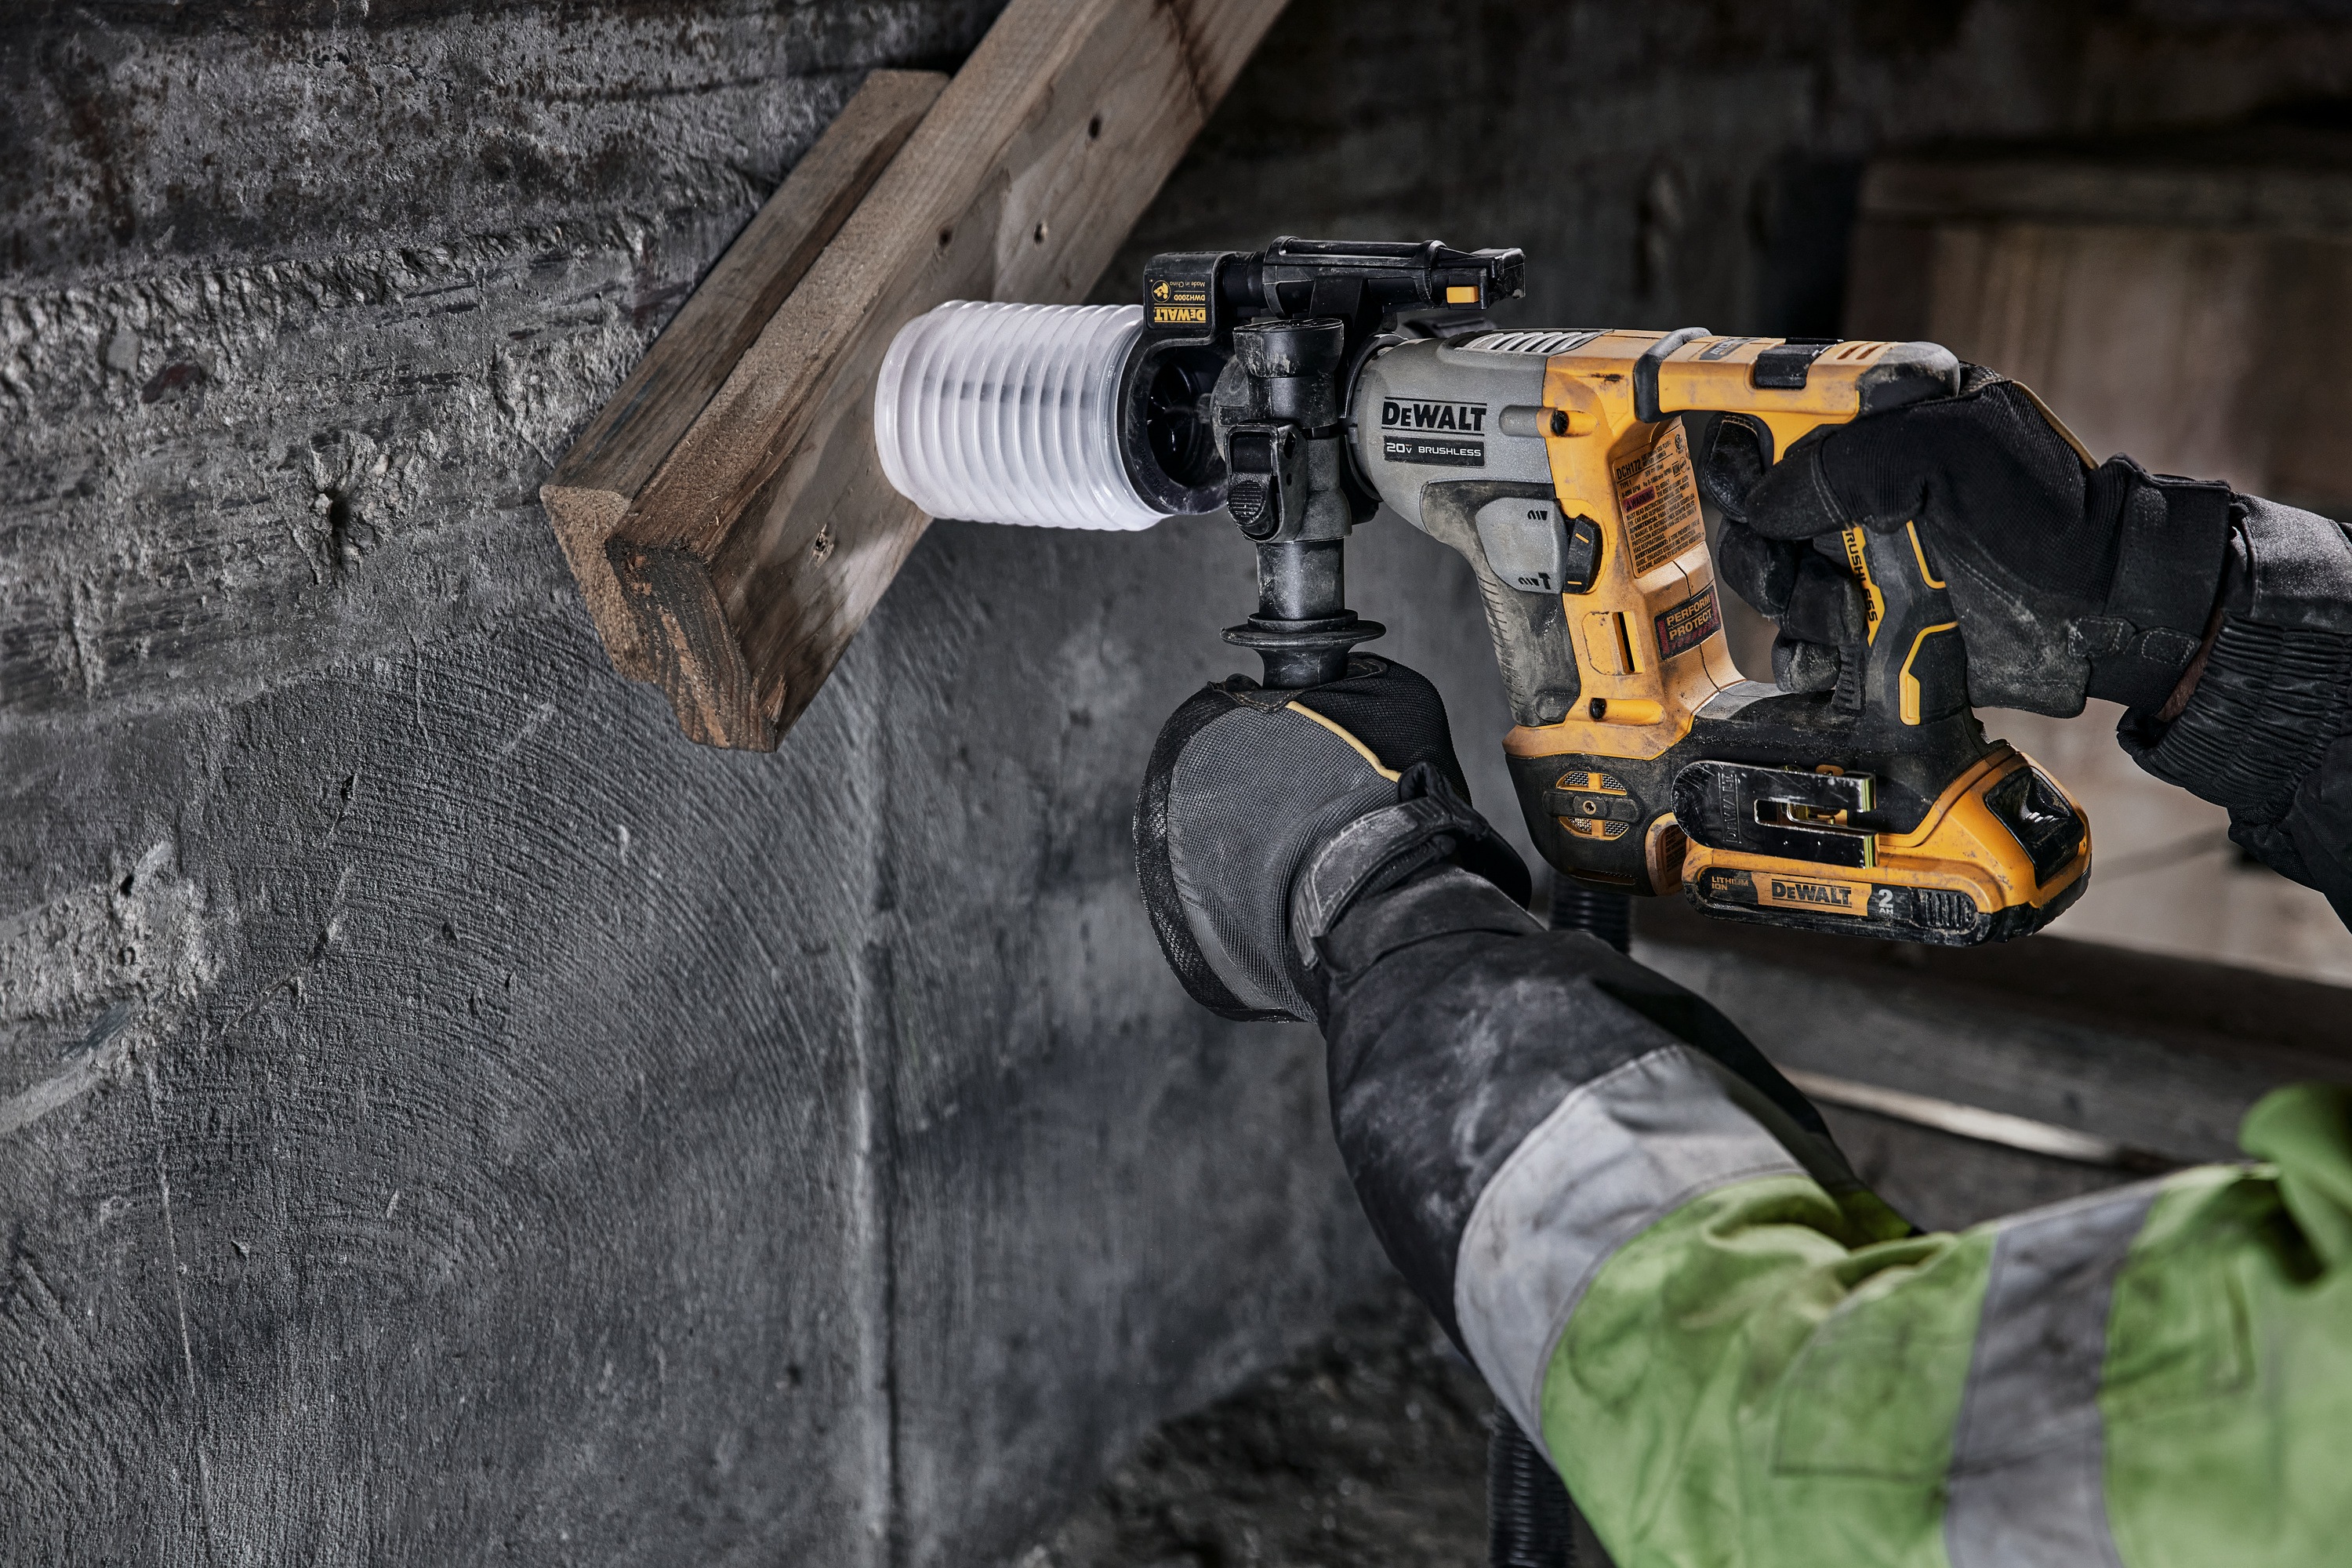 Atomic 20 volt five eighths inch brushless cordless S D S plus rotary hammer kit being used to hammer wood.